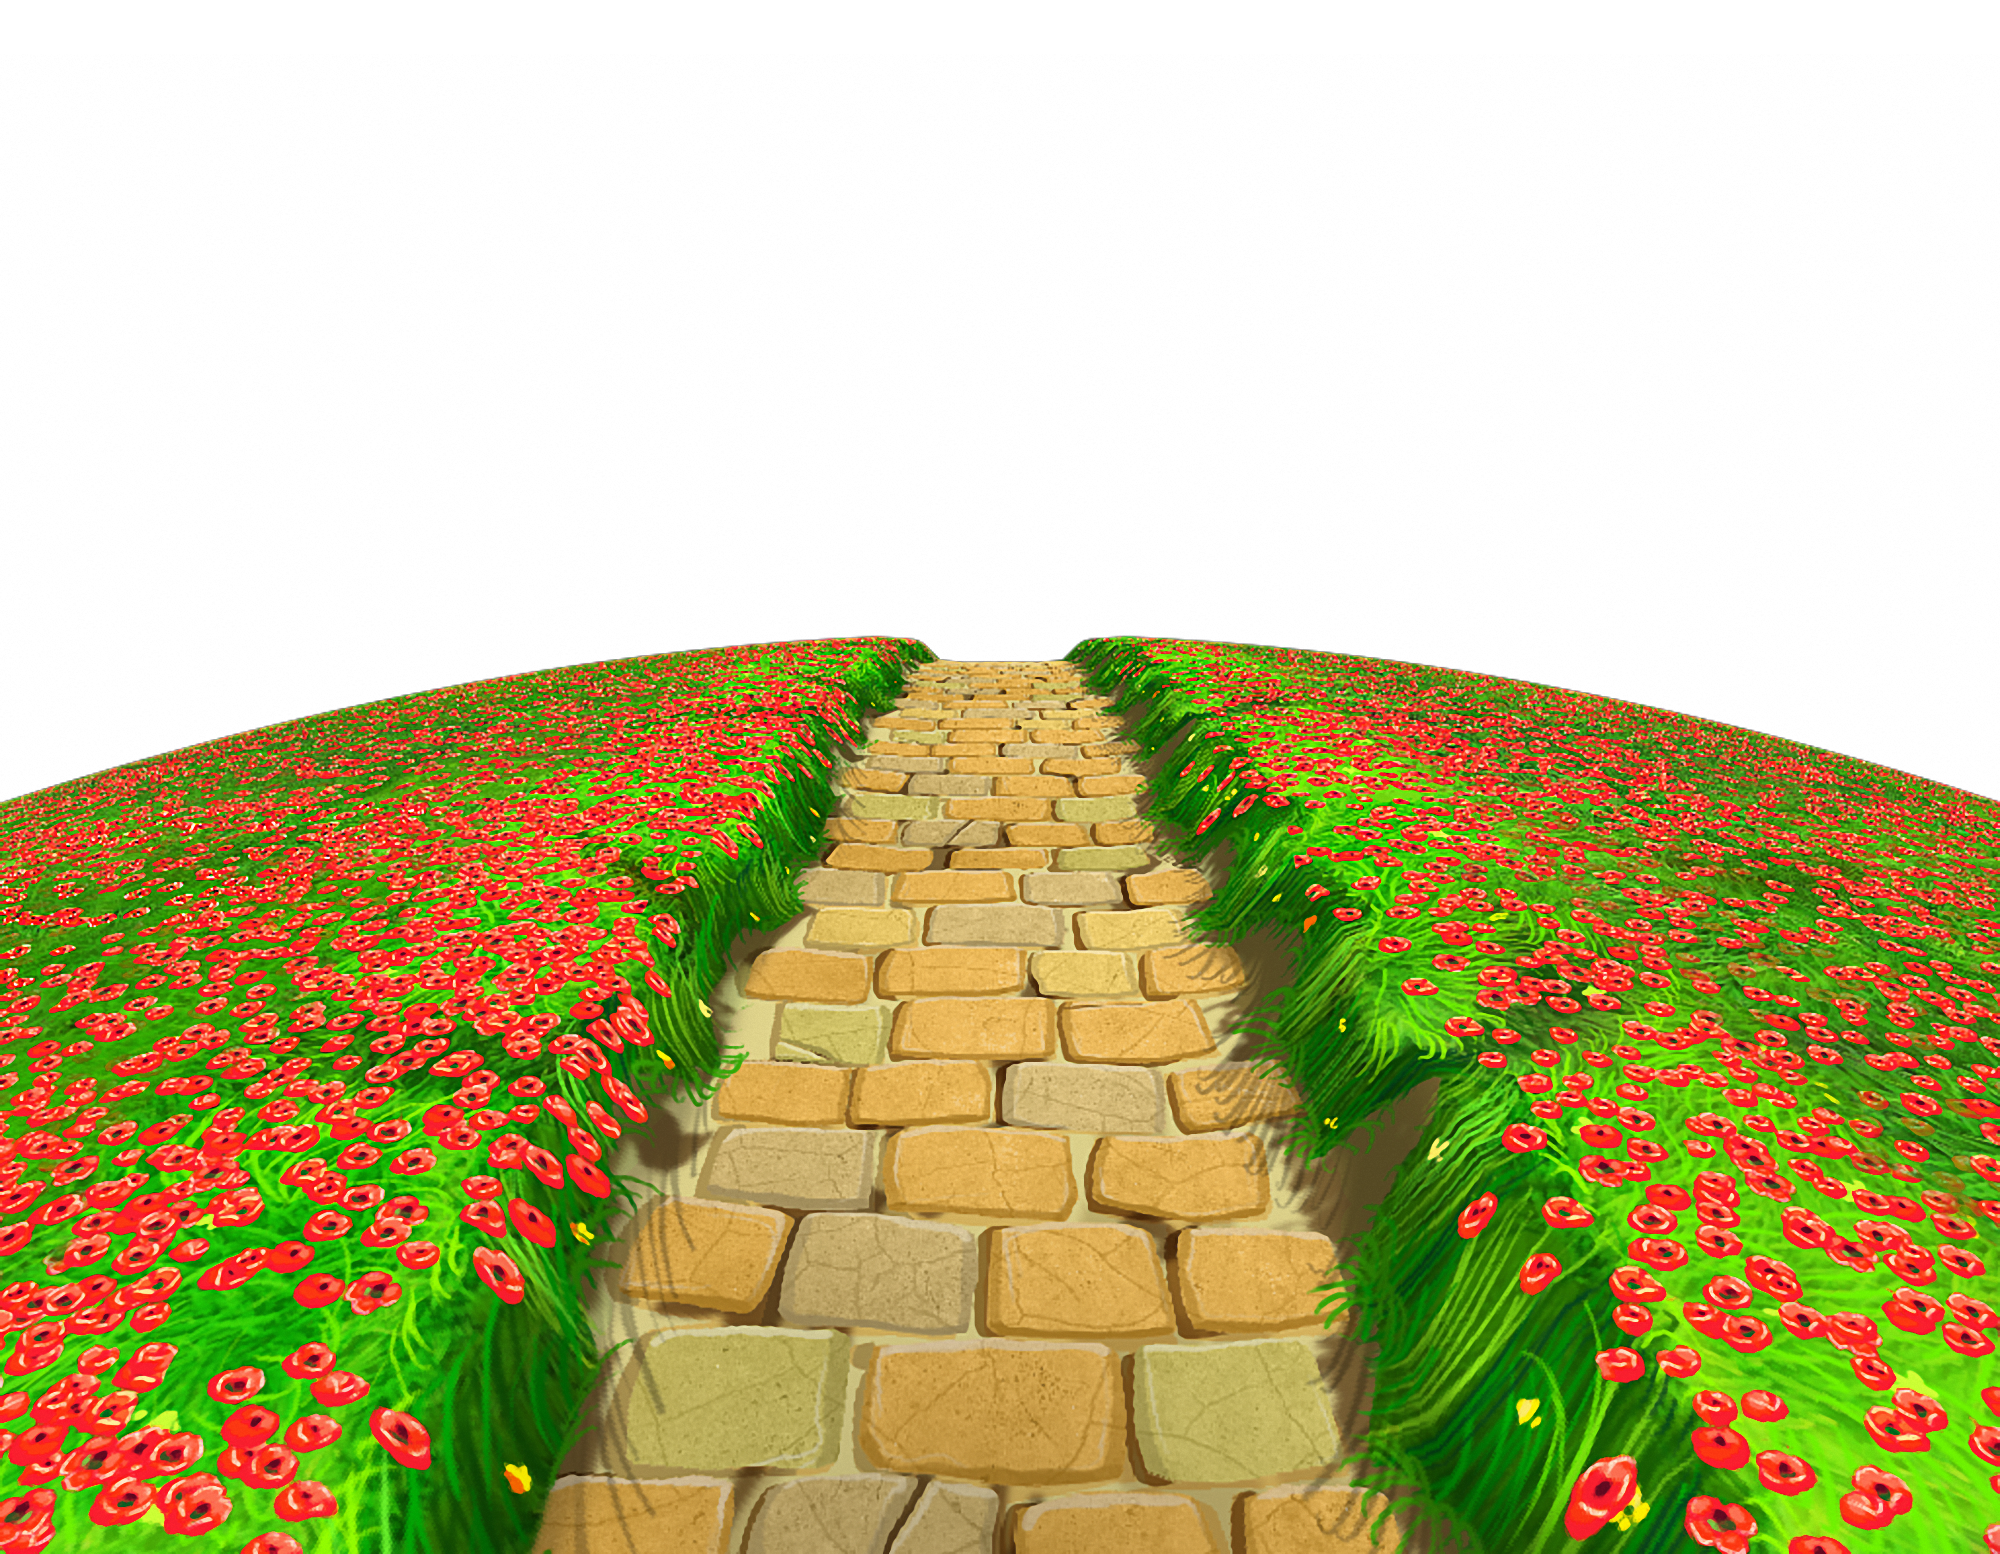 stone path clipart drawing